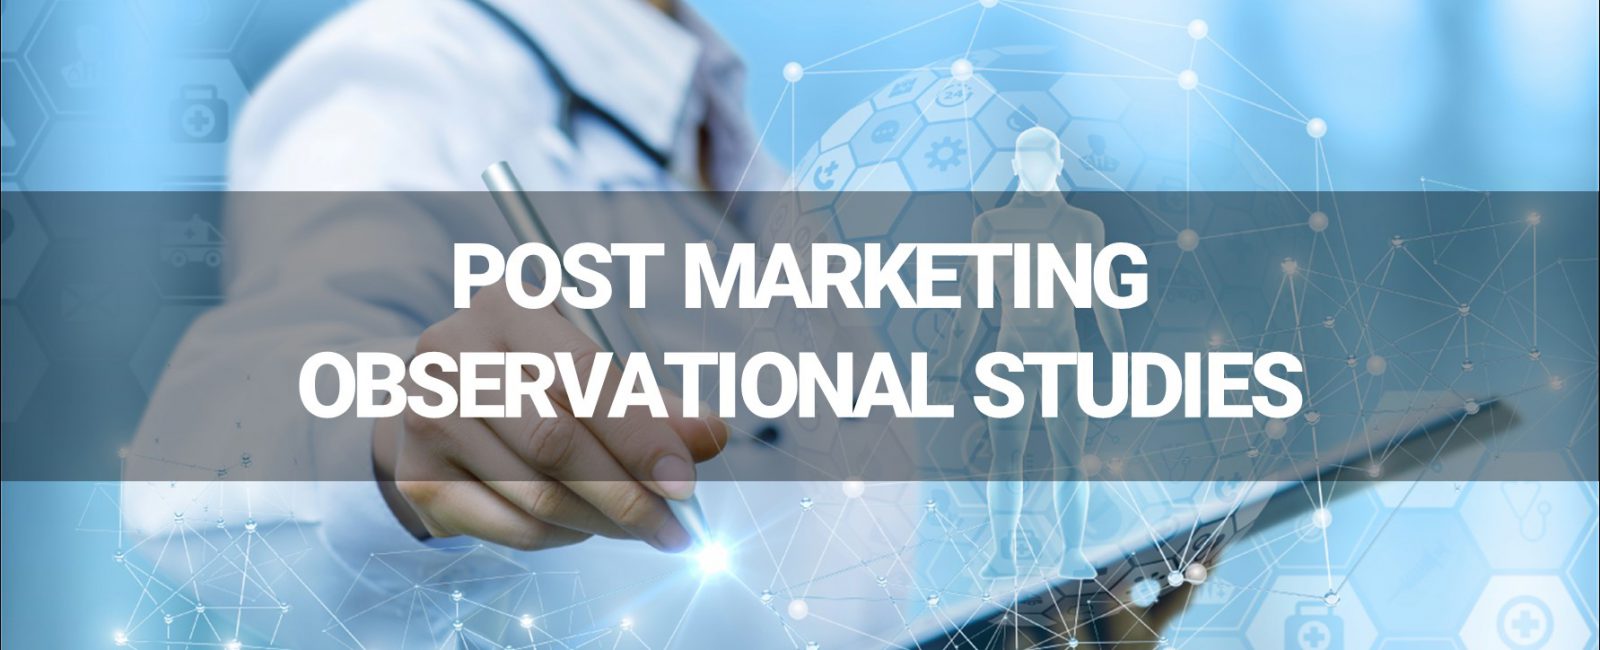 What are Post Marketing Observational Studies